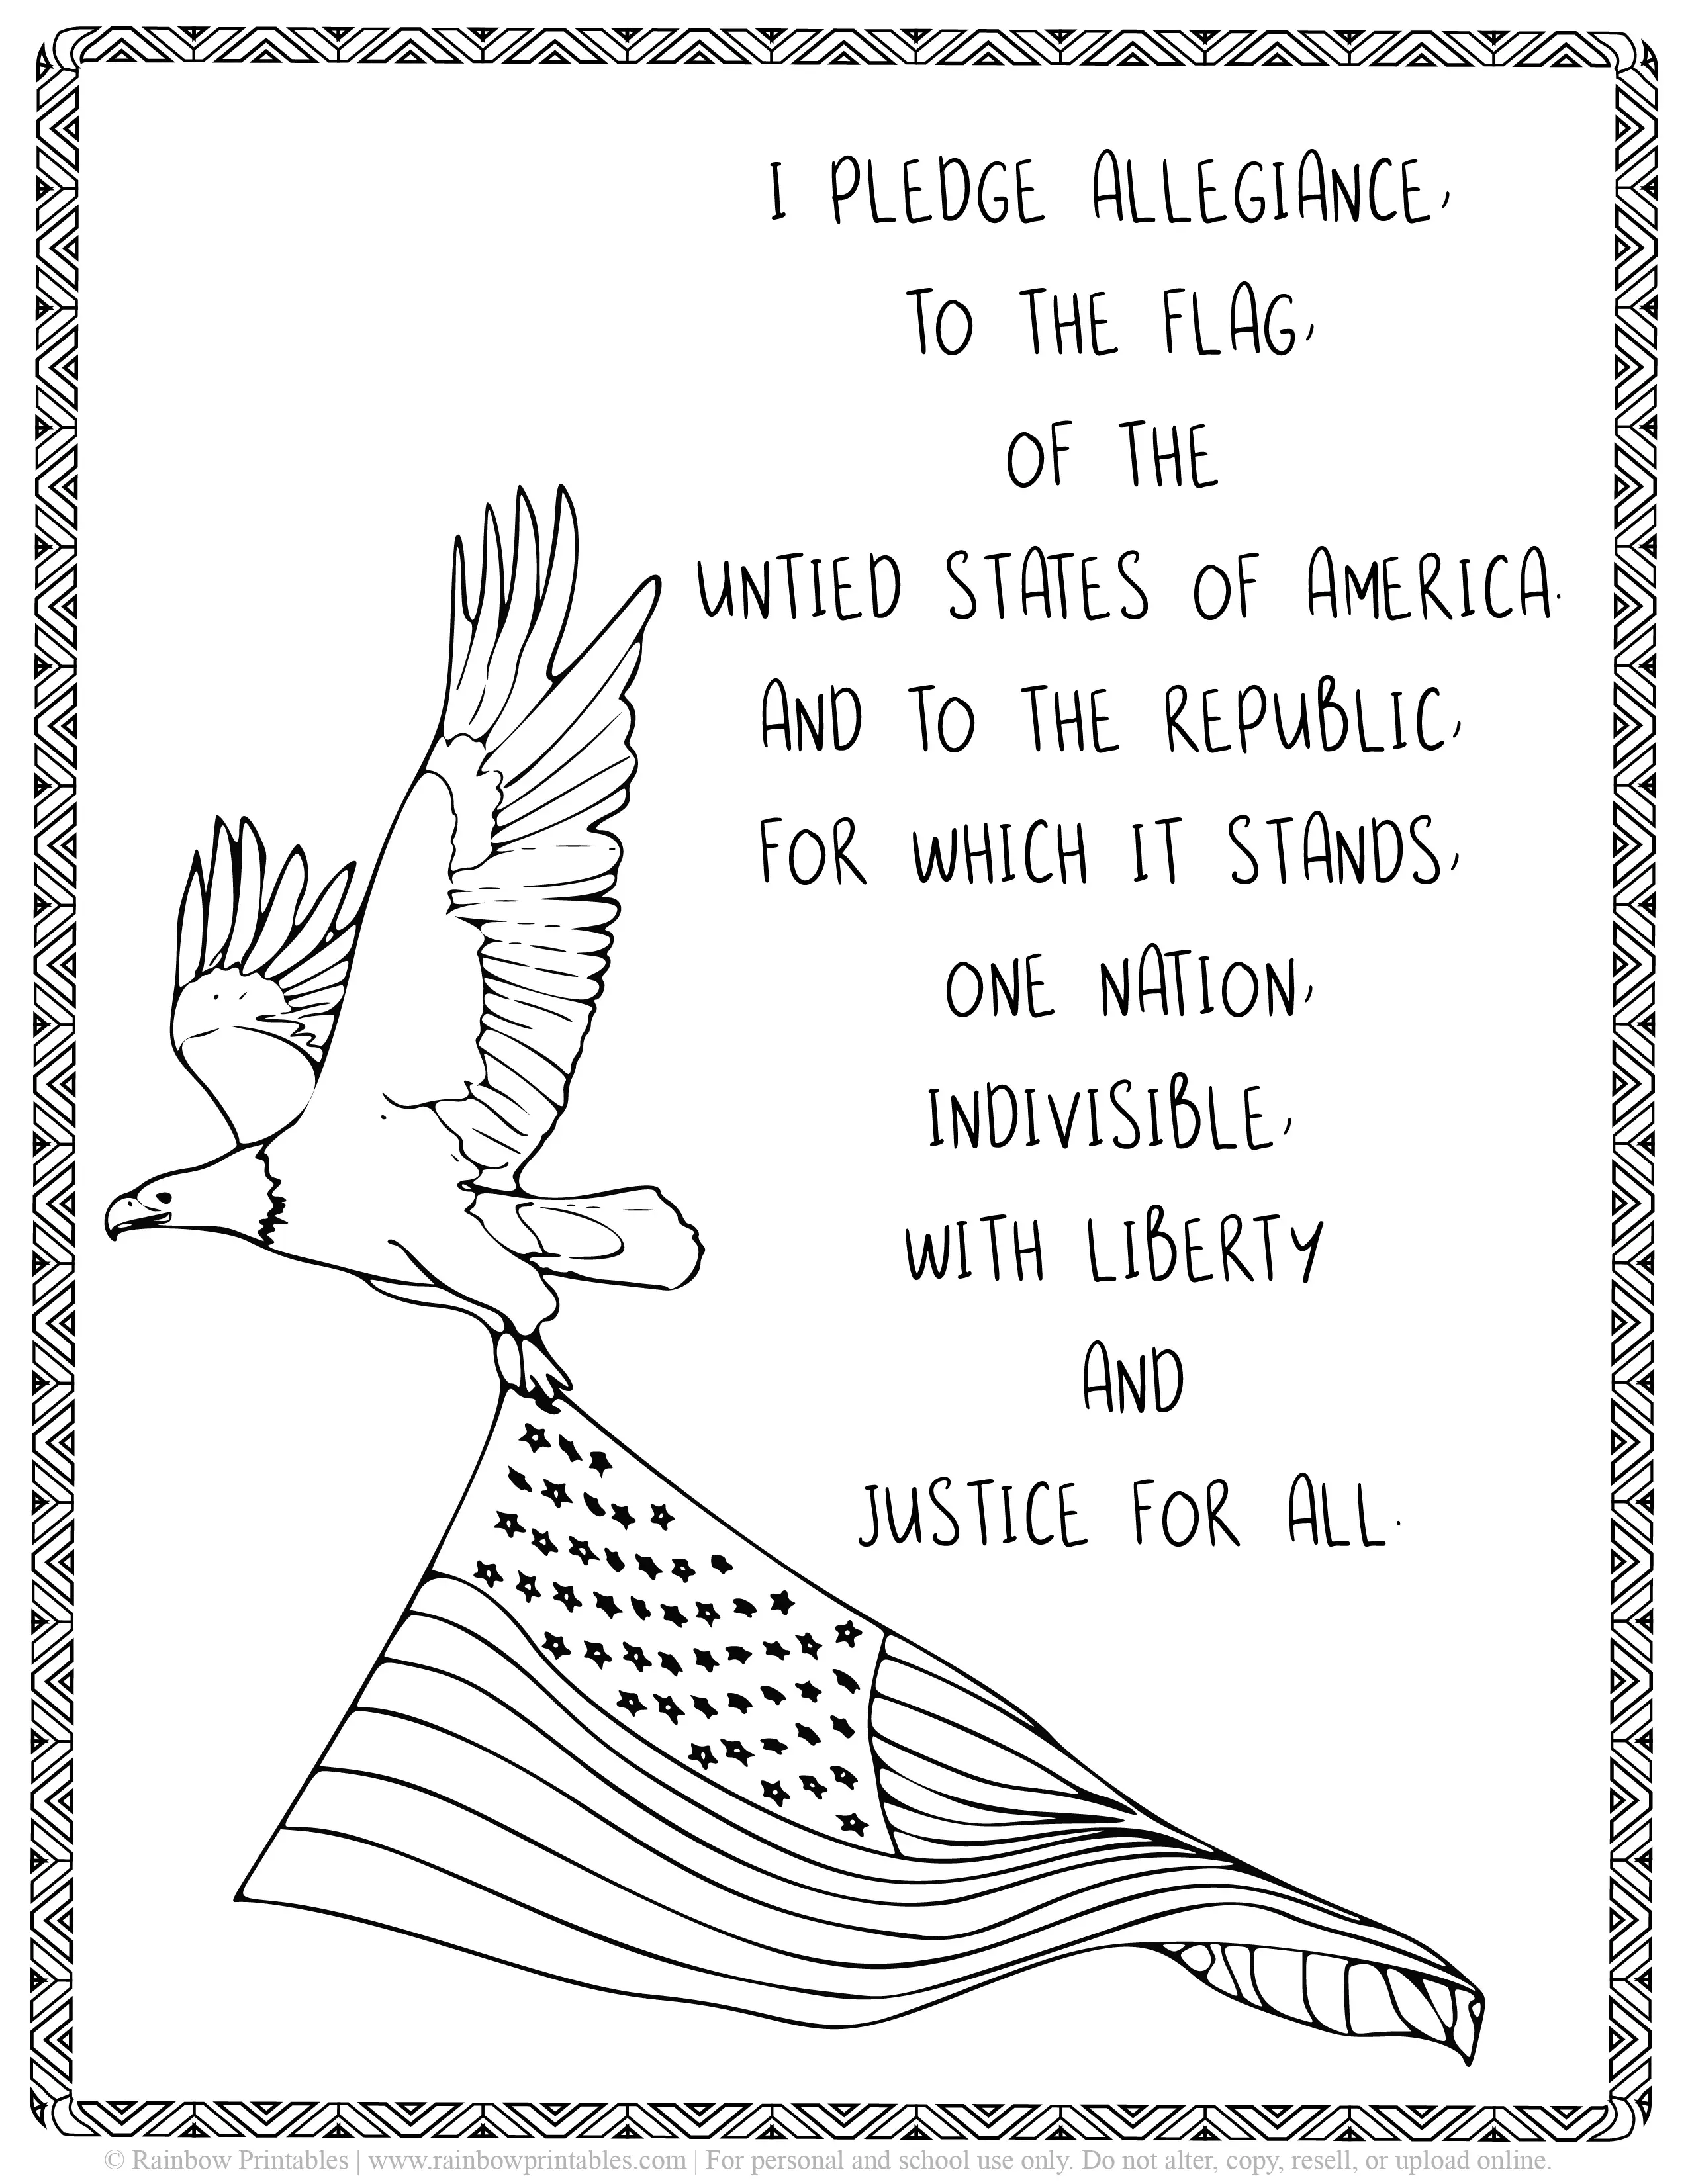 14 free july 4th printable activities coloring sheets for kids rainbow printables